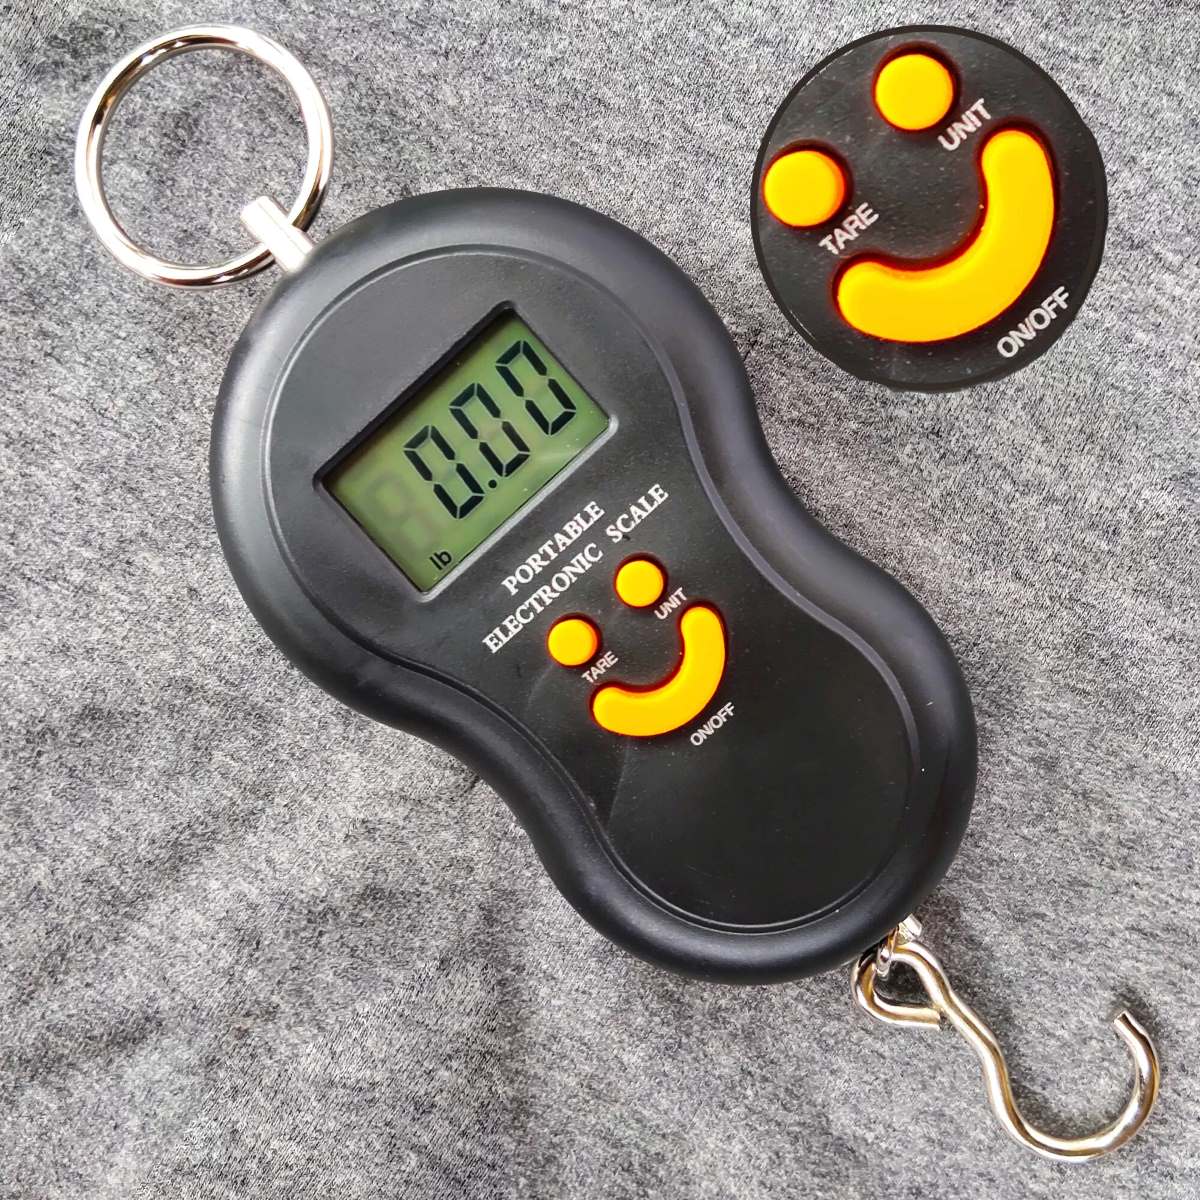 FREETOO Luggage Scale Portable Digital Hanging Scale